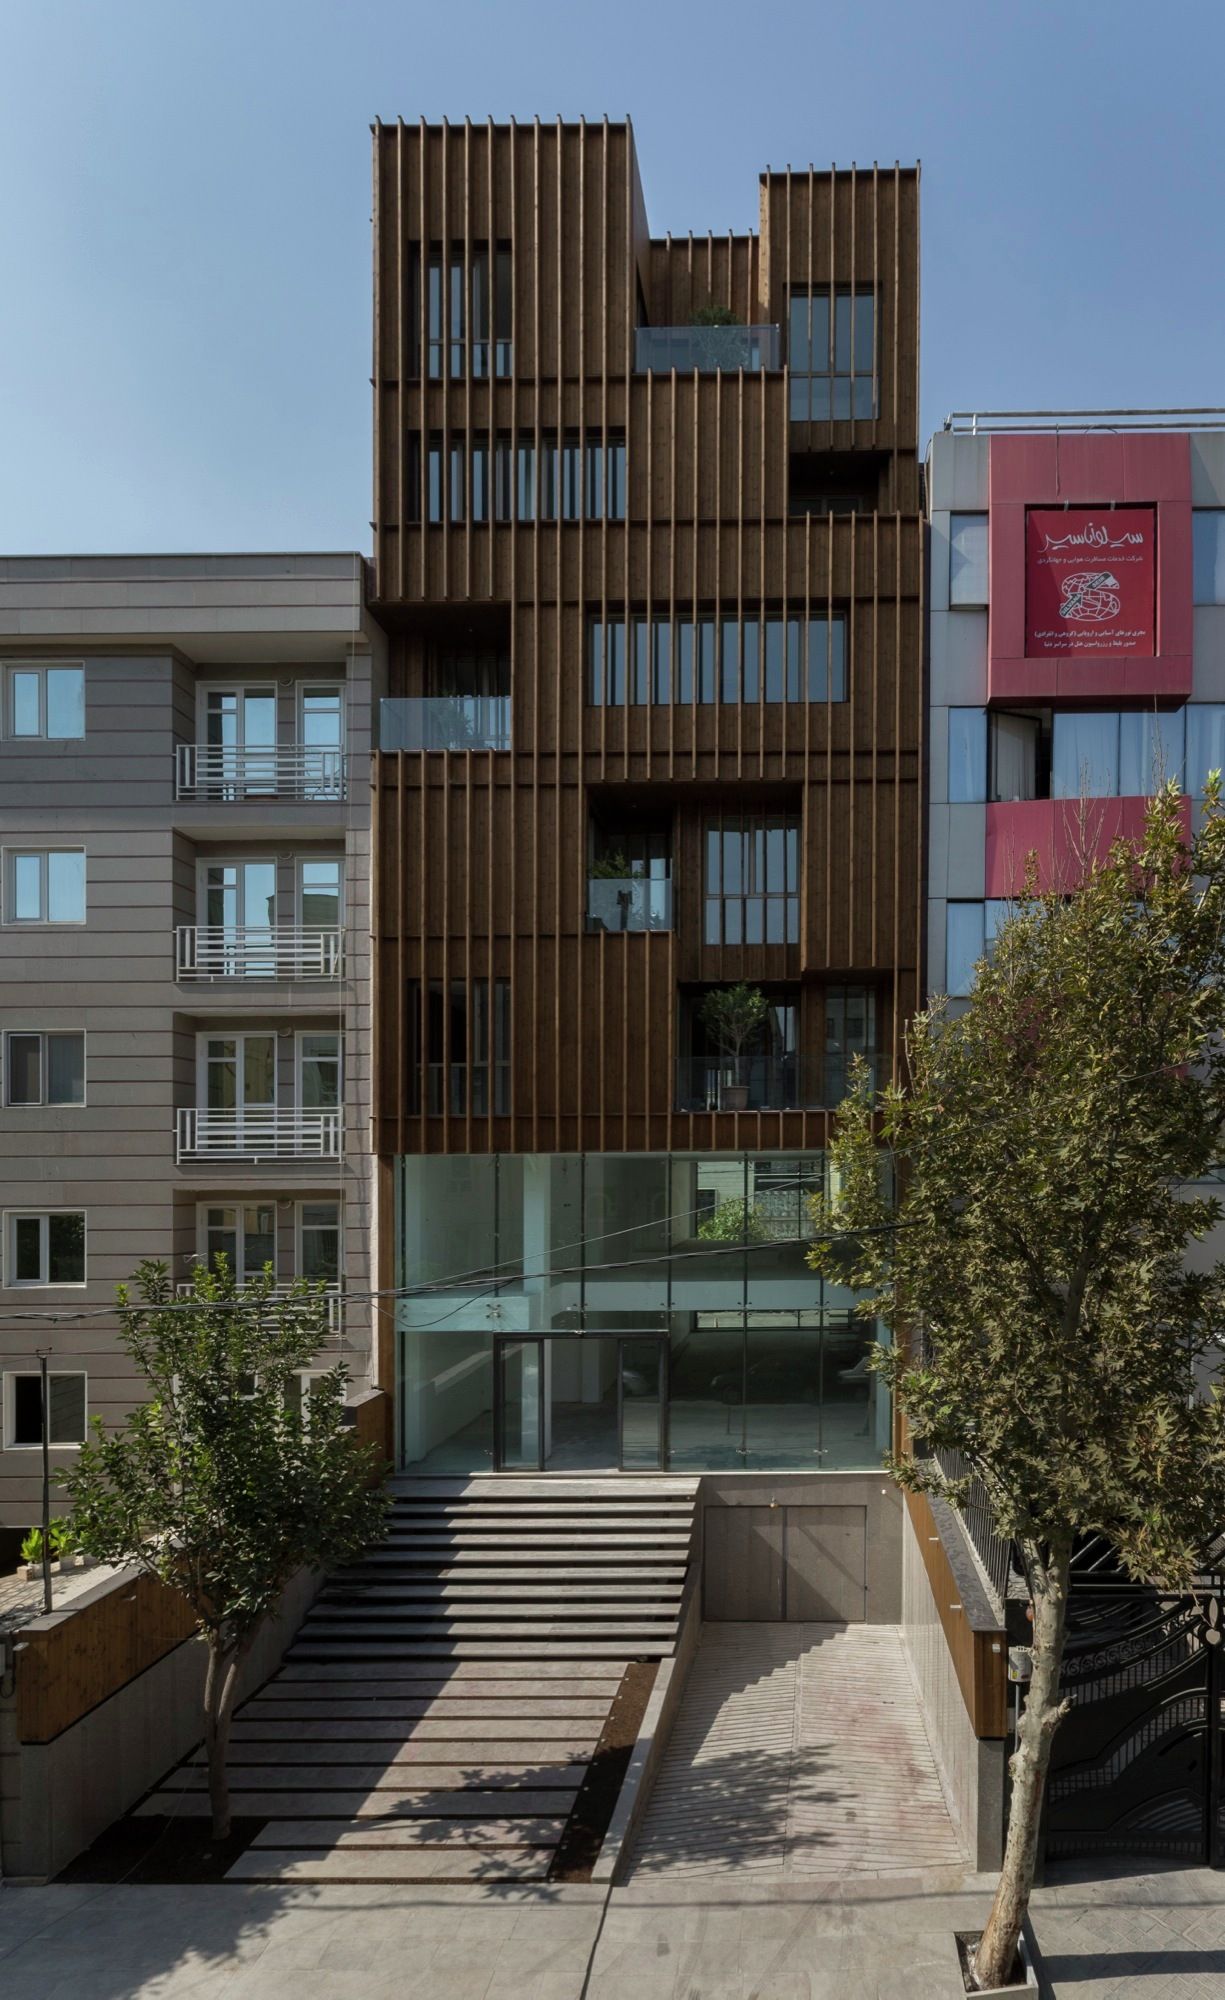 Stylish Balconies Become Integral Parts Of Their Building's Facade